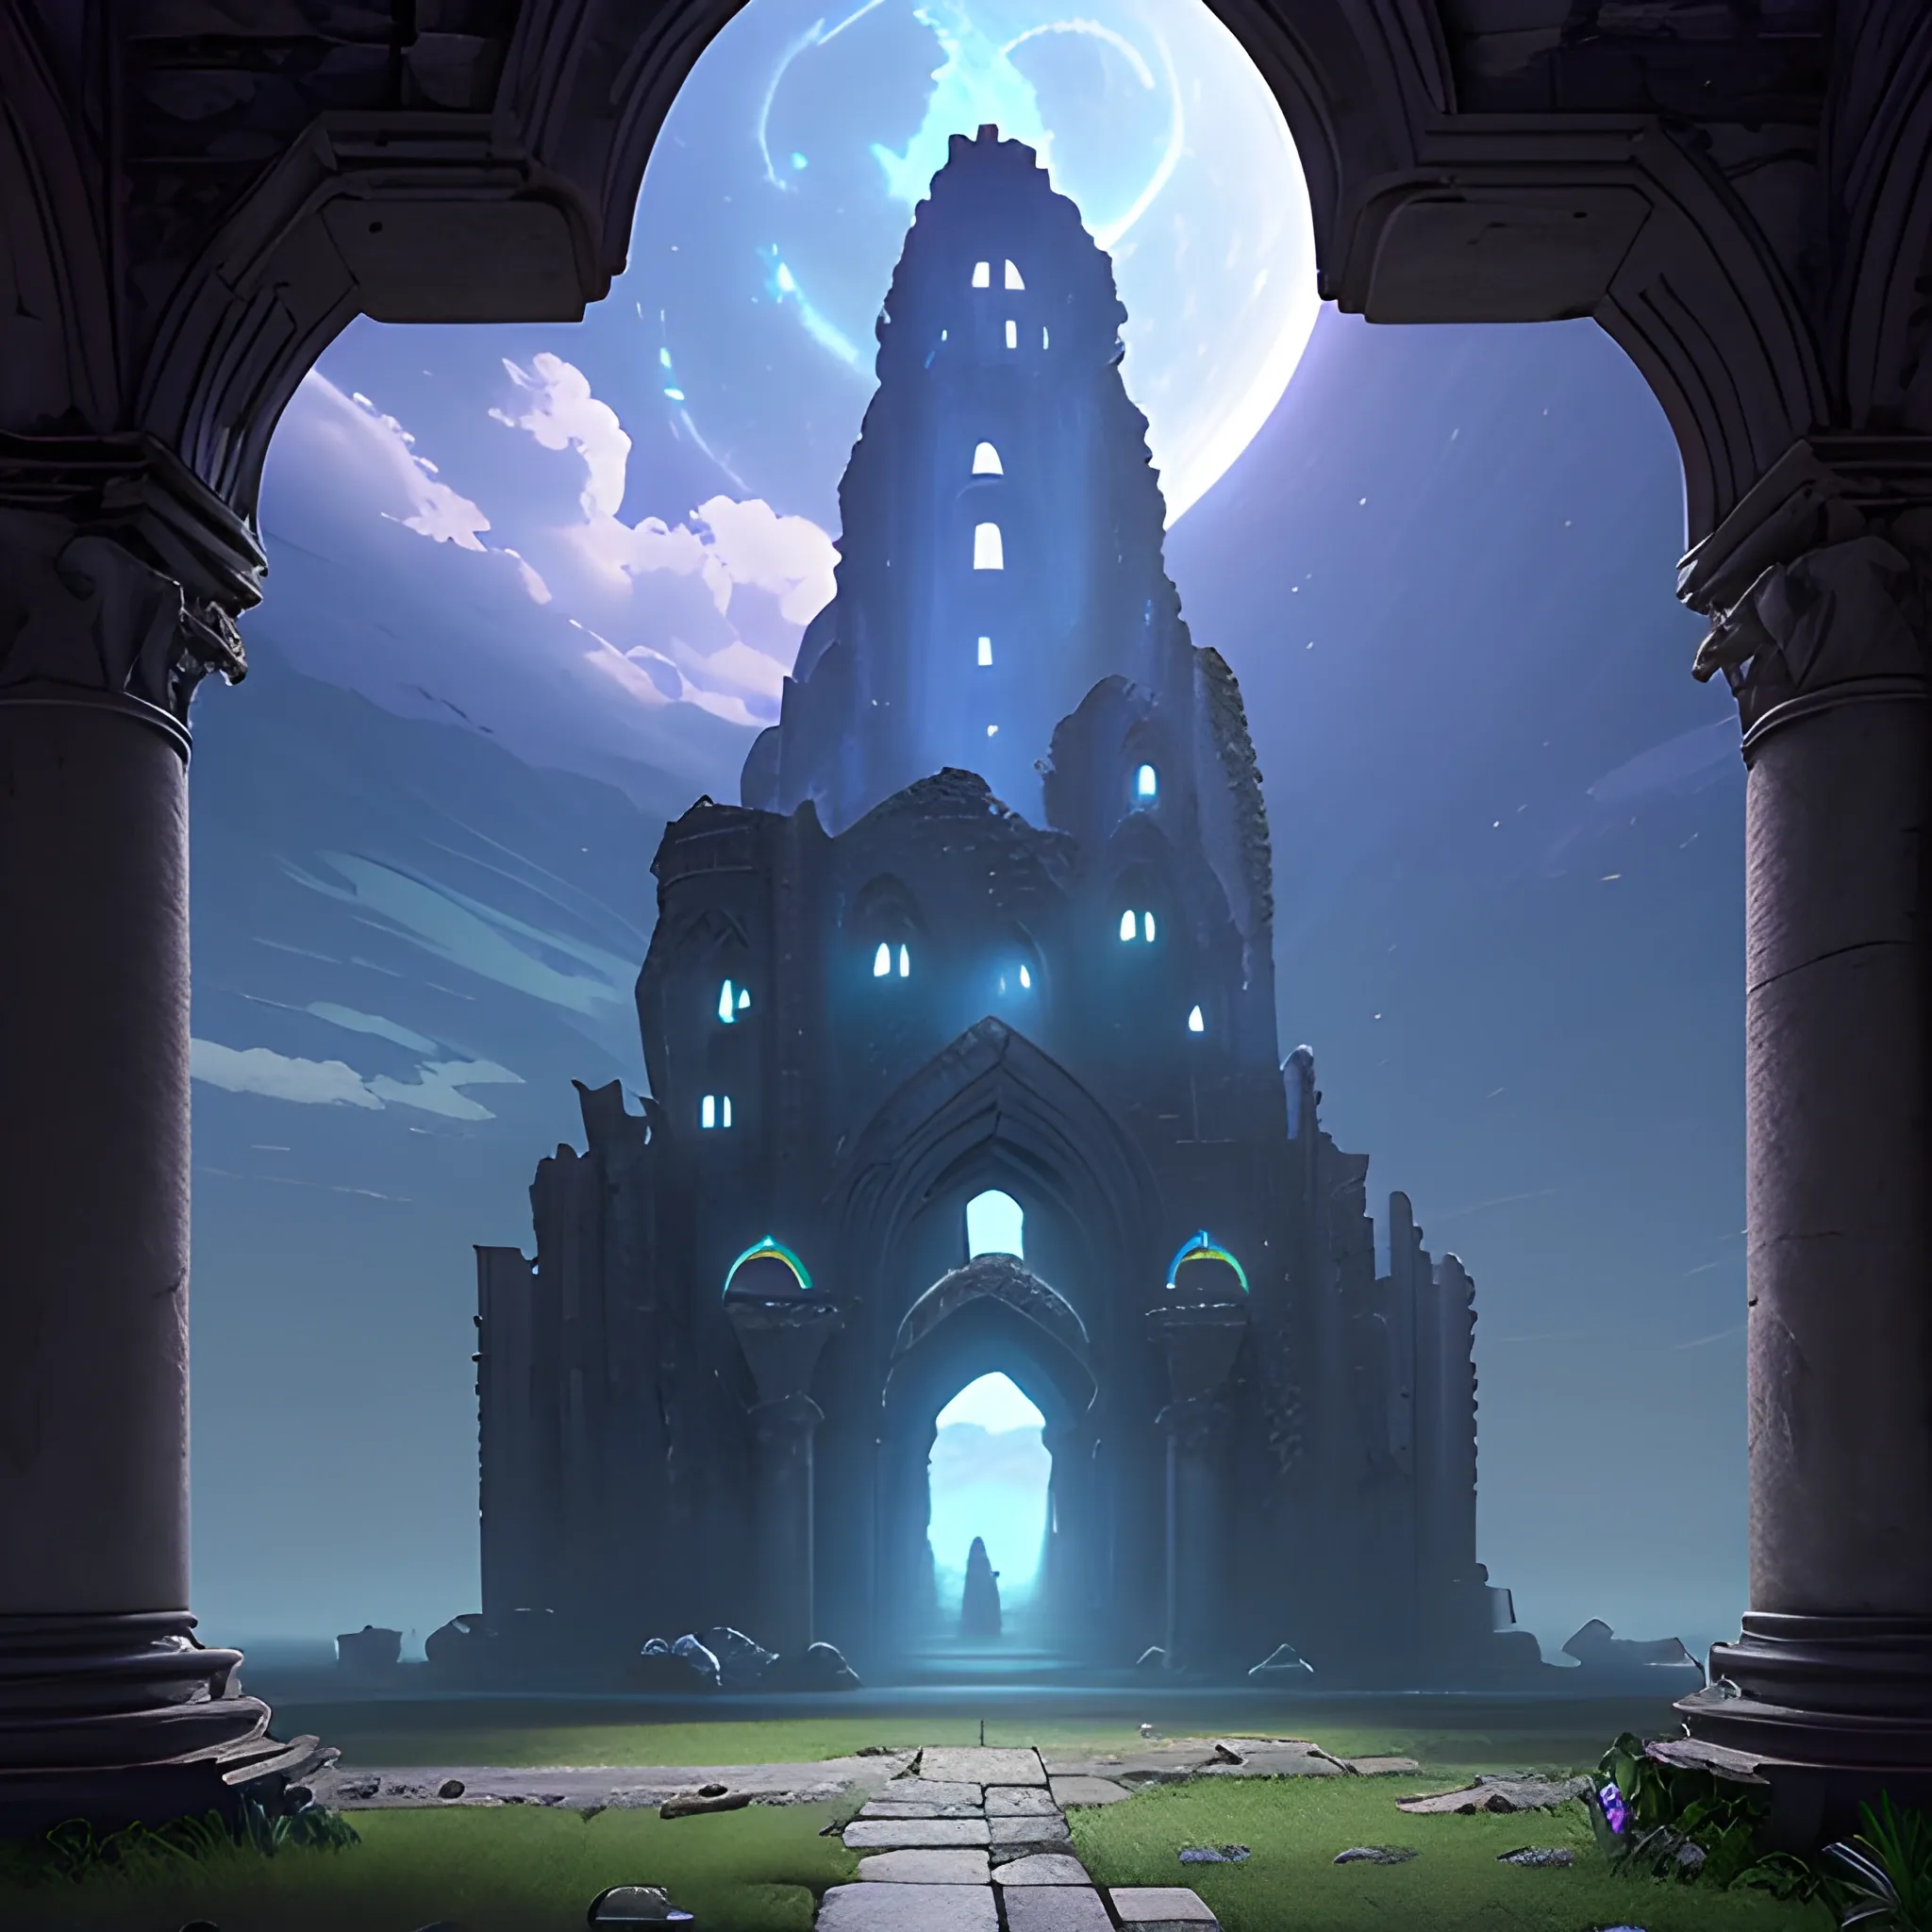 "Lonely Planet," "Majestic Ruins," "Ethereal Glow," "Cinematic Lighting, Cinematic Shadows," "3D Style, Anime Elements"
"width": 960, "height": 540, "seed": "566136464", step:"60", "version": "SH_Deliberate"